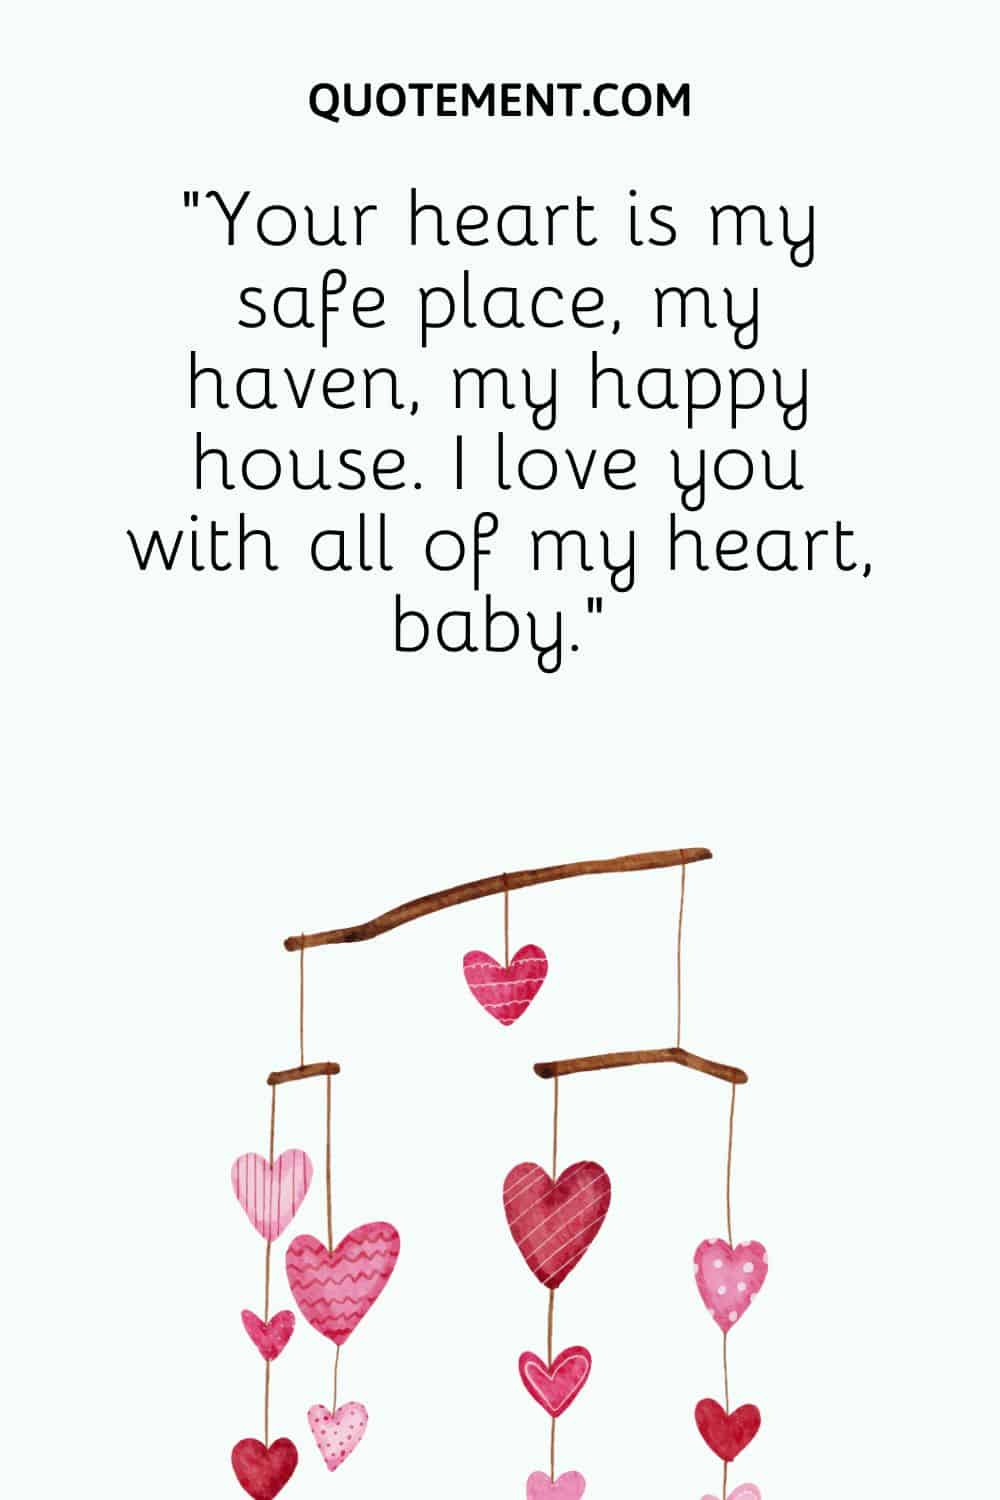 Your heart is my safe place, my haven, my happy house